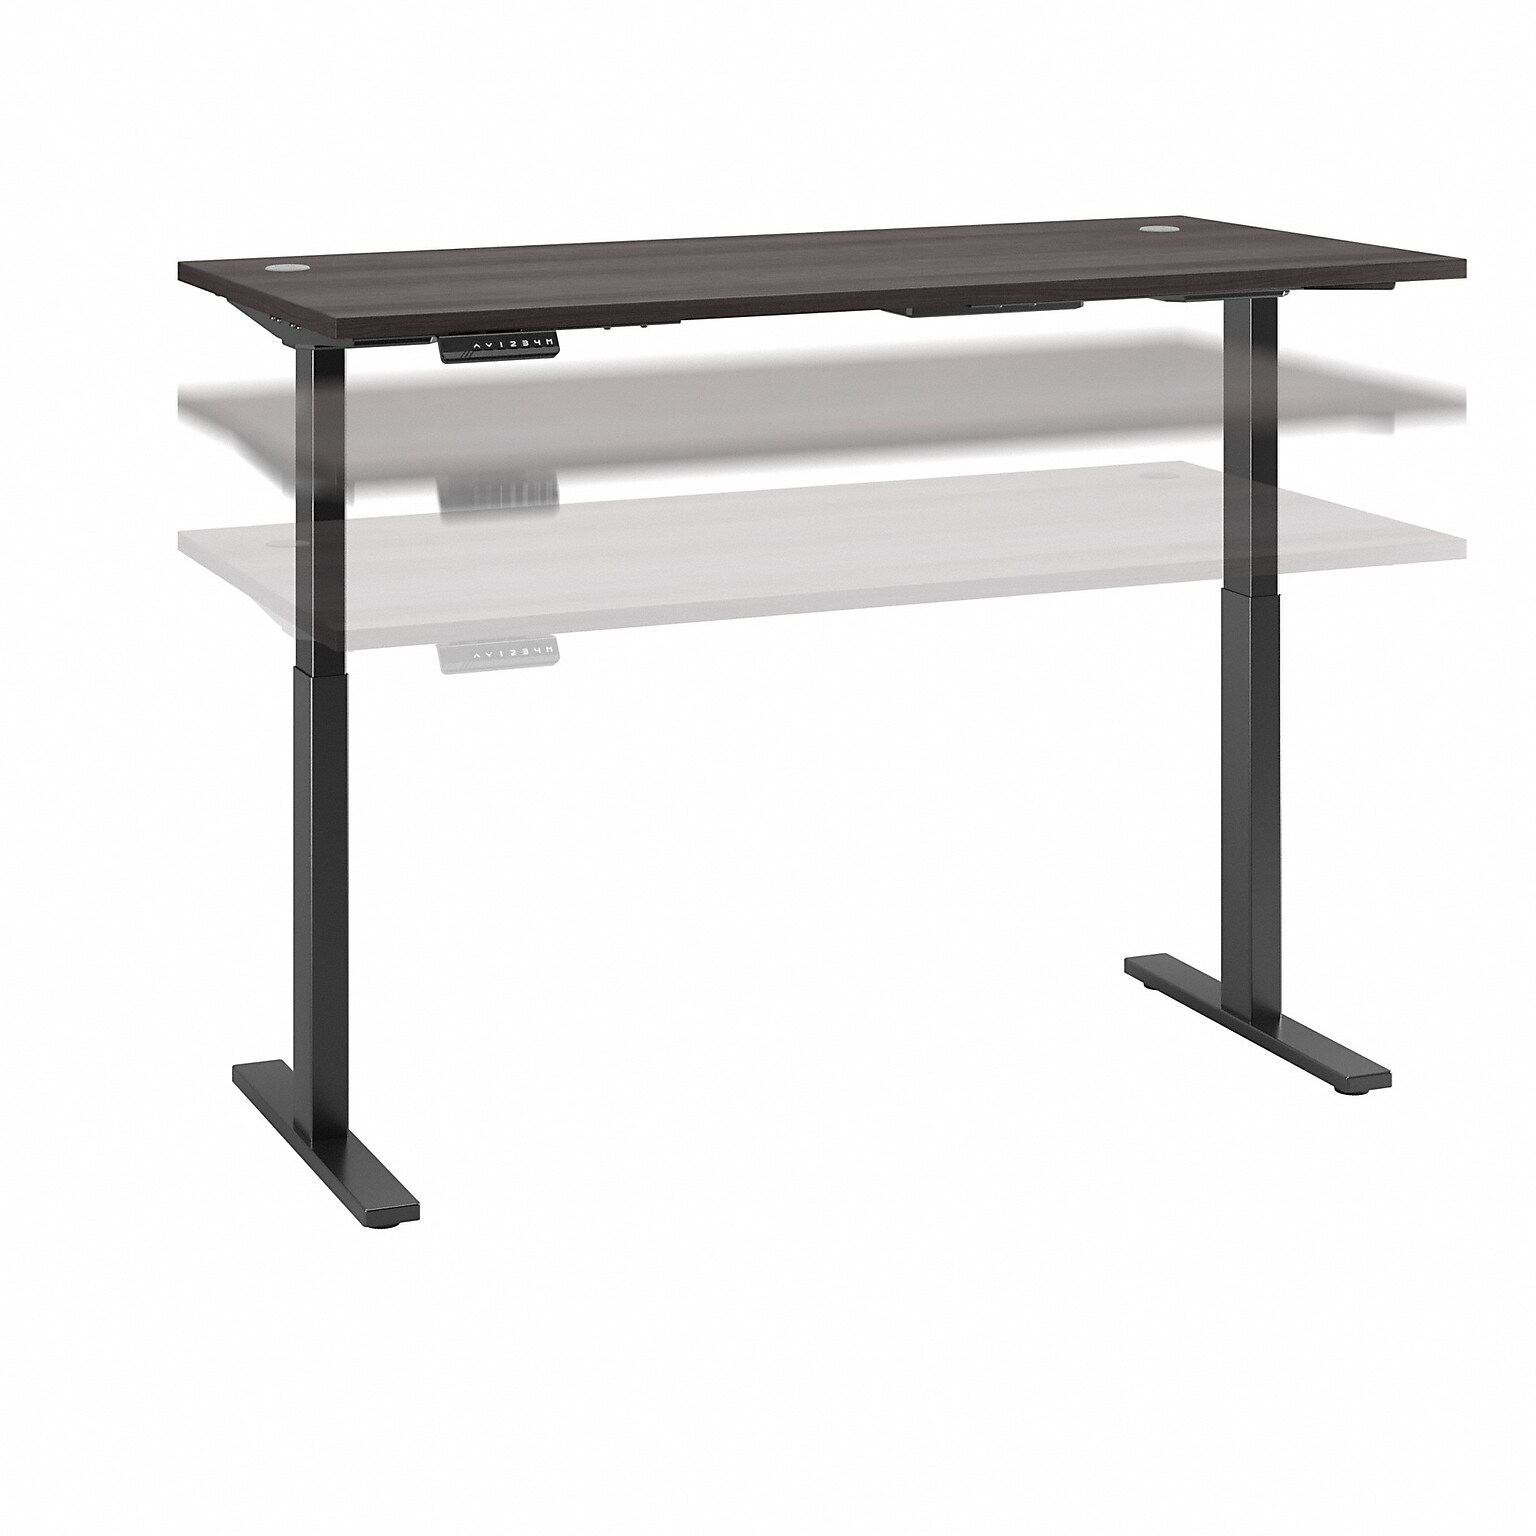 Bush Business Furniture Move 60 Series 72W Electric Height Adjustable Standing Desk, Storm Gray (M6S7230SGBK)